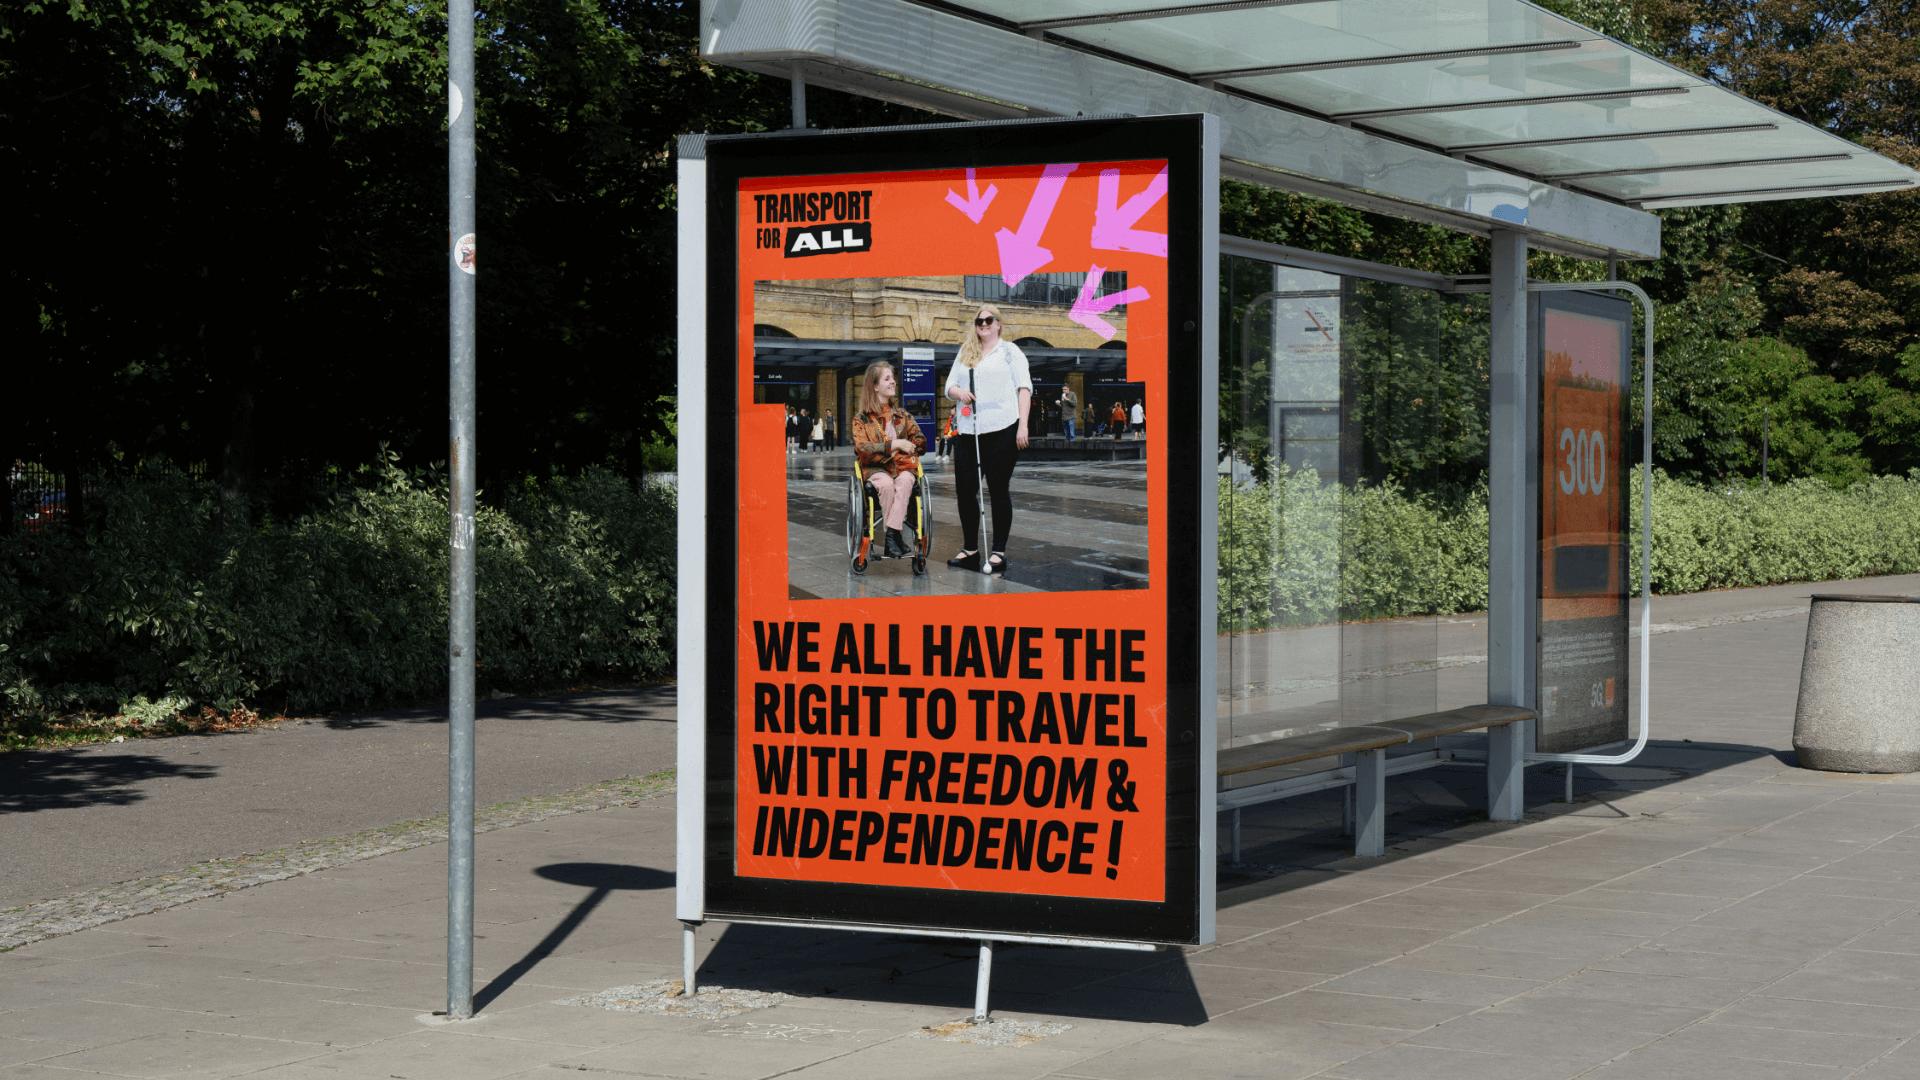 Image for A poster at a bus stop showing the Transport For All charity brand in application.